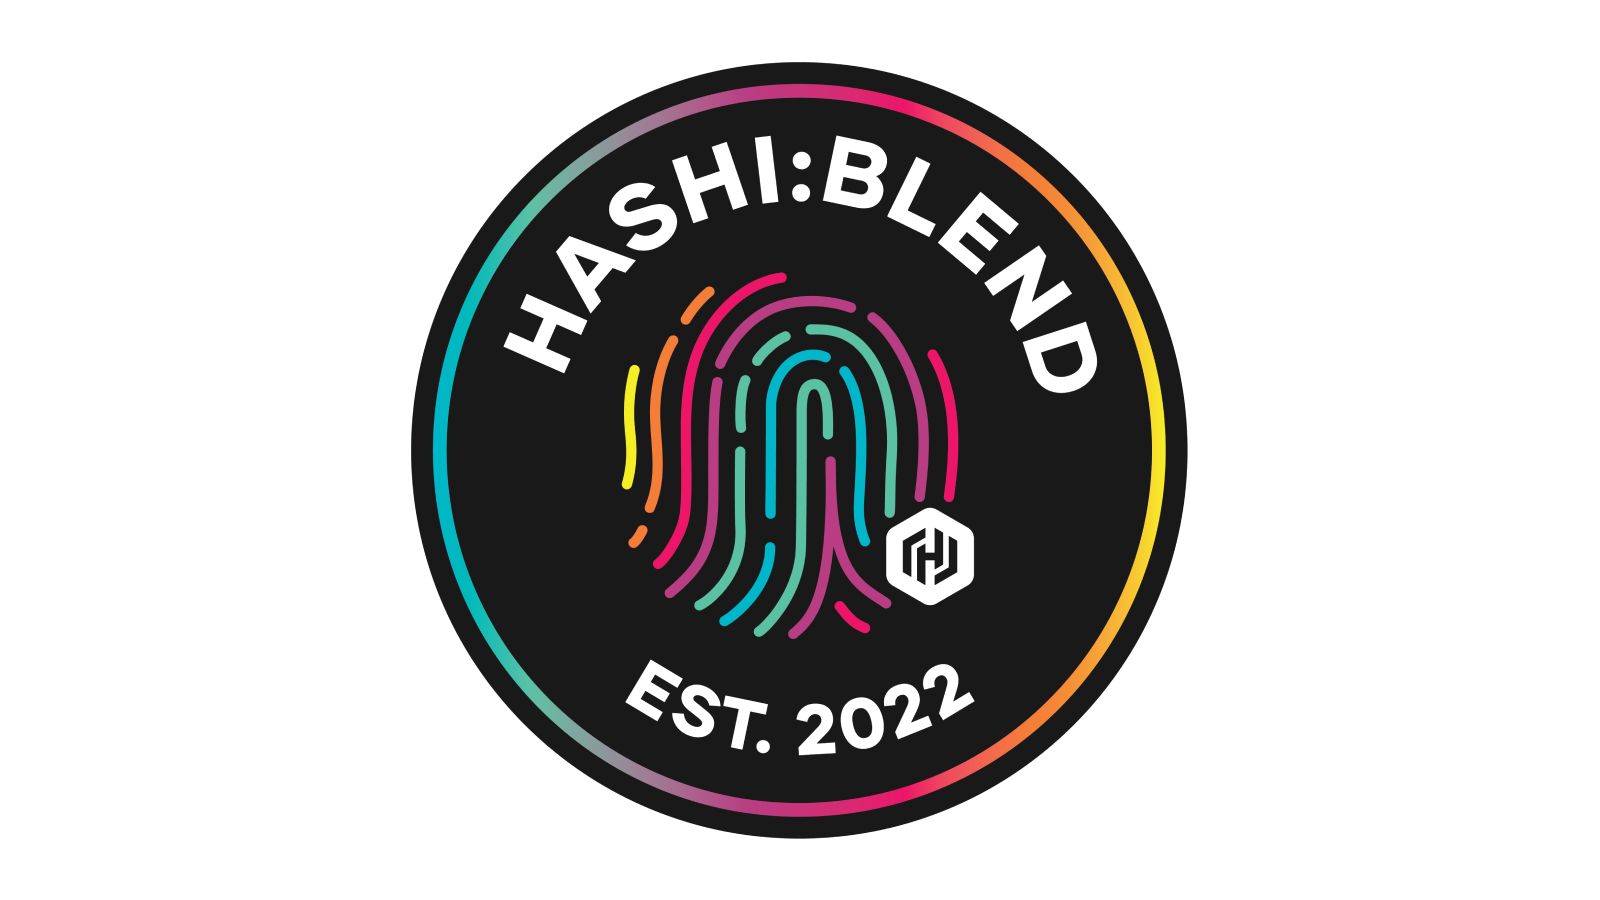 Celebrating Mixed Identities with the Hashi:Blend ERG